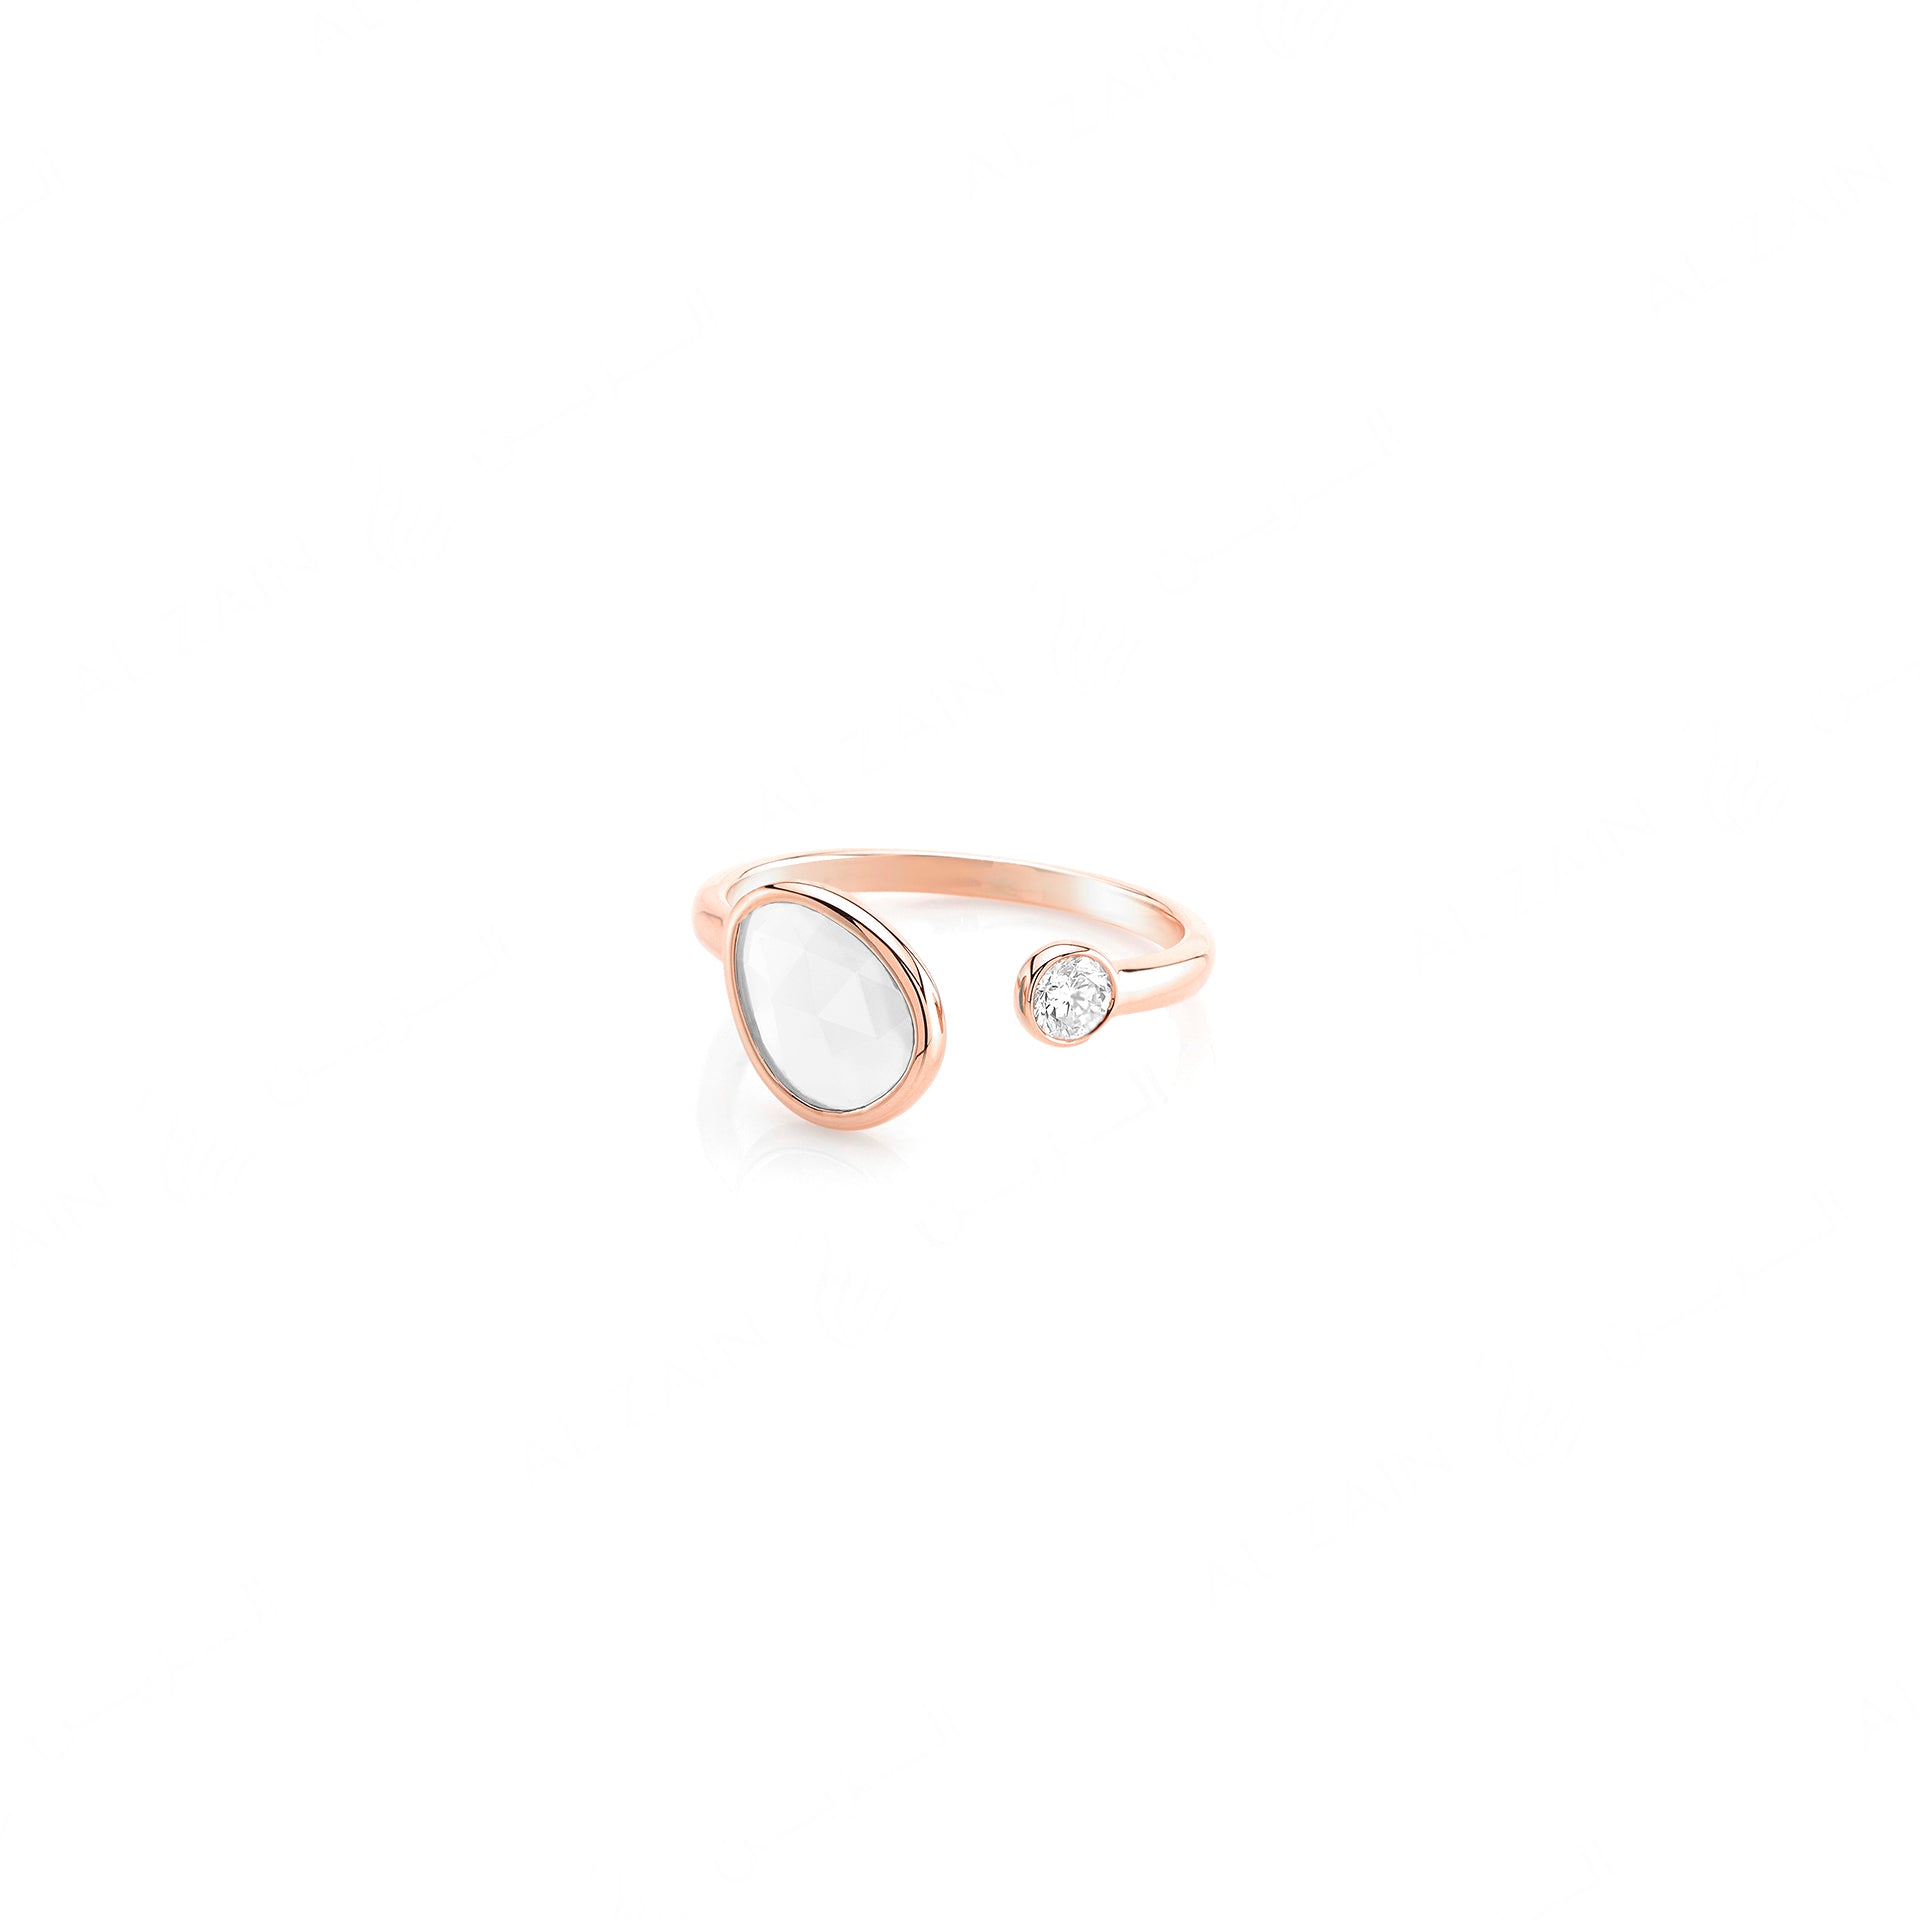 Simply Nina ring in 18k rose gold with Mother of Pearl stone and diamond